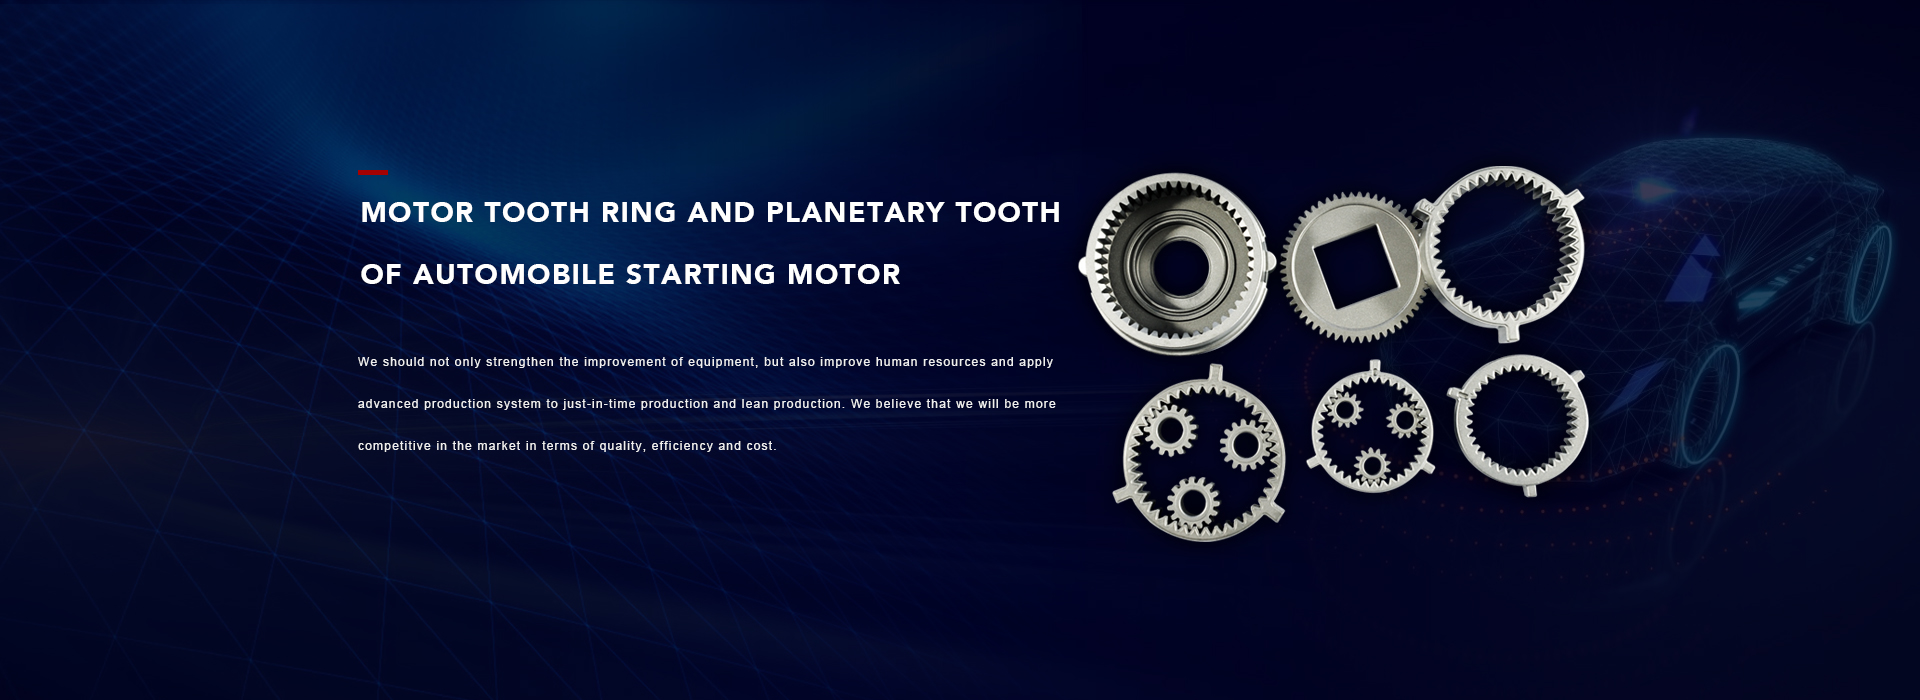 MOTOR TOOTH FING AND PLANETARY TOOTH OF AUTOMOBILE STARTING MOTOR